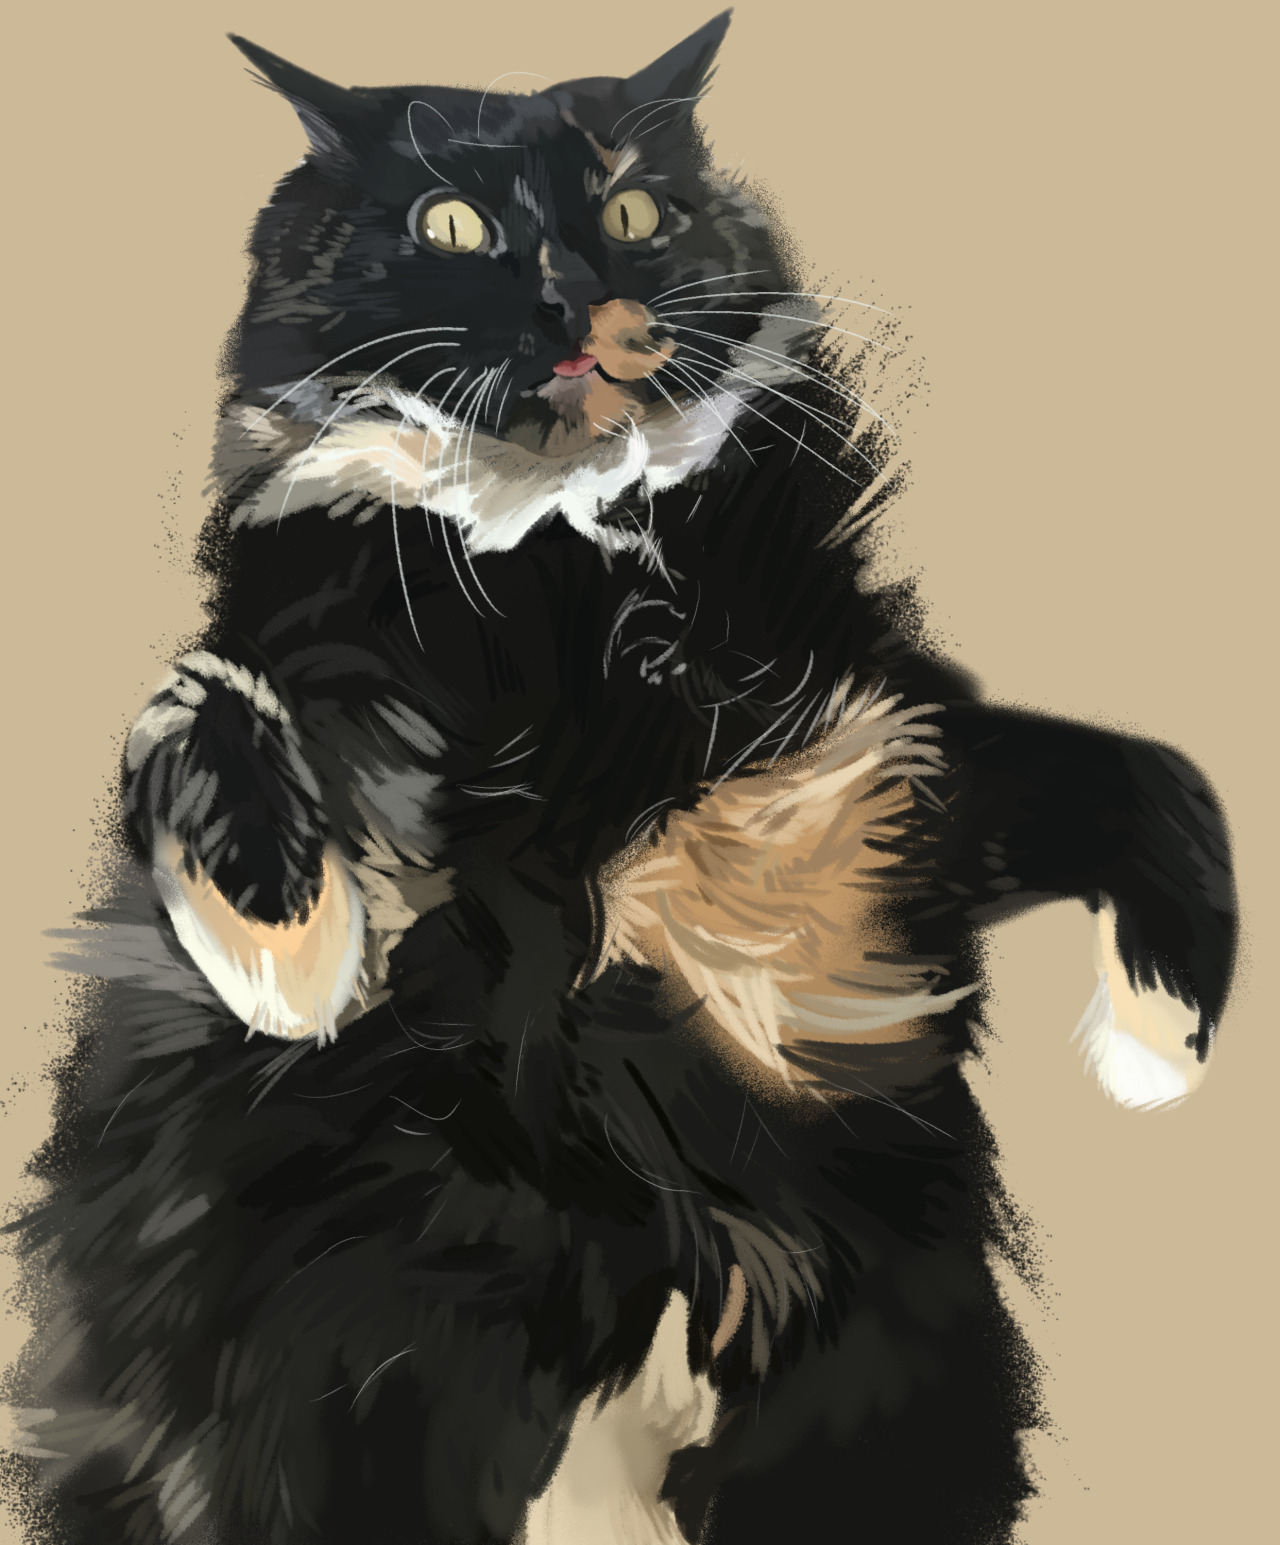 December 28, 2019. another painting of my cat!!